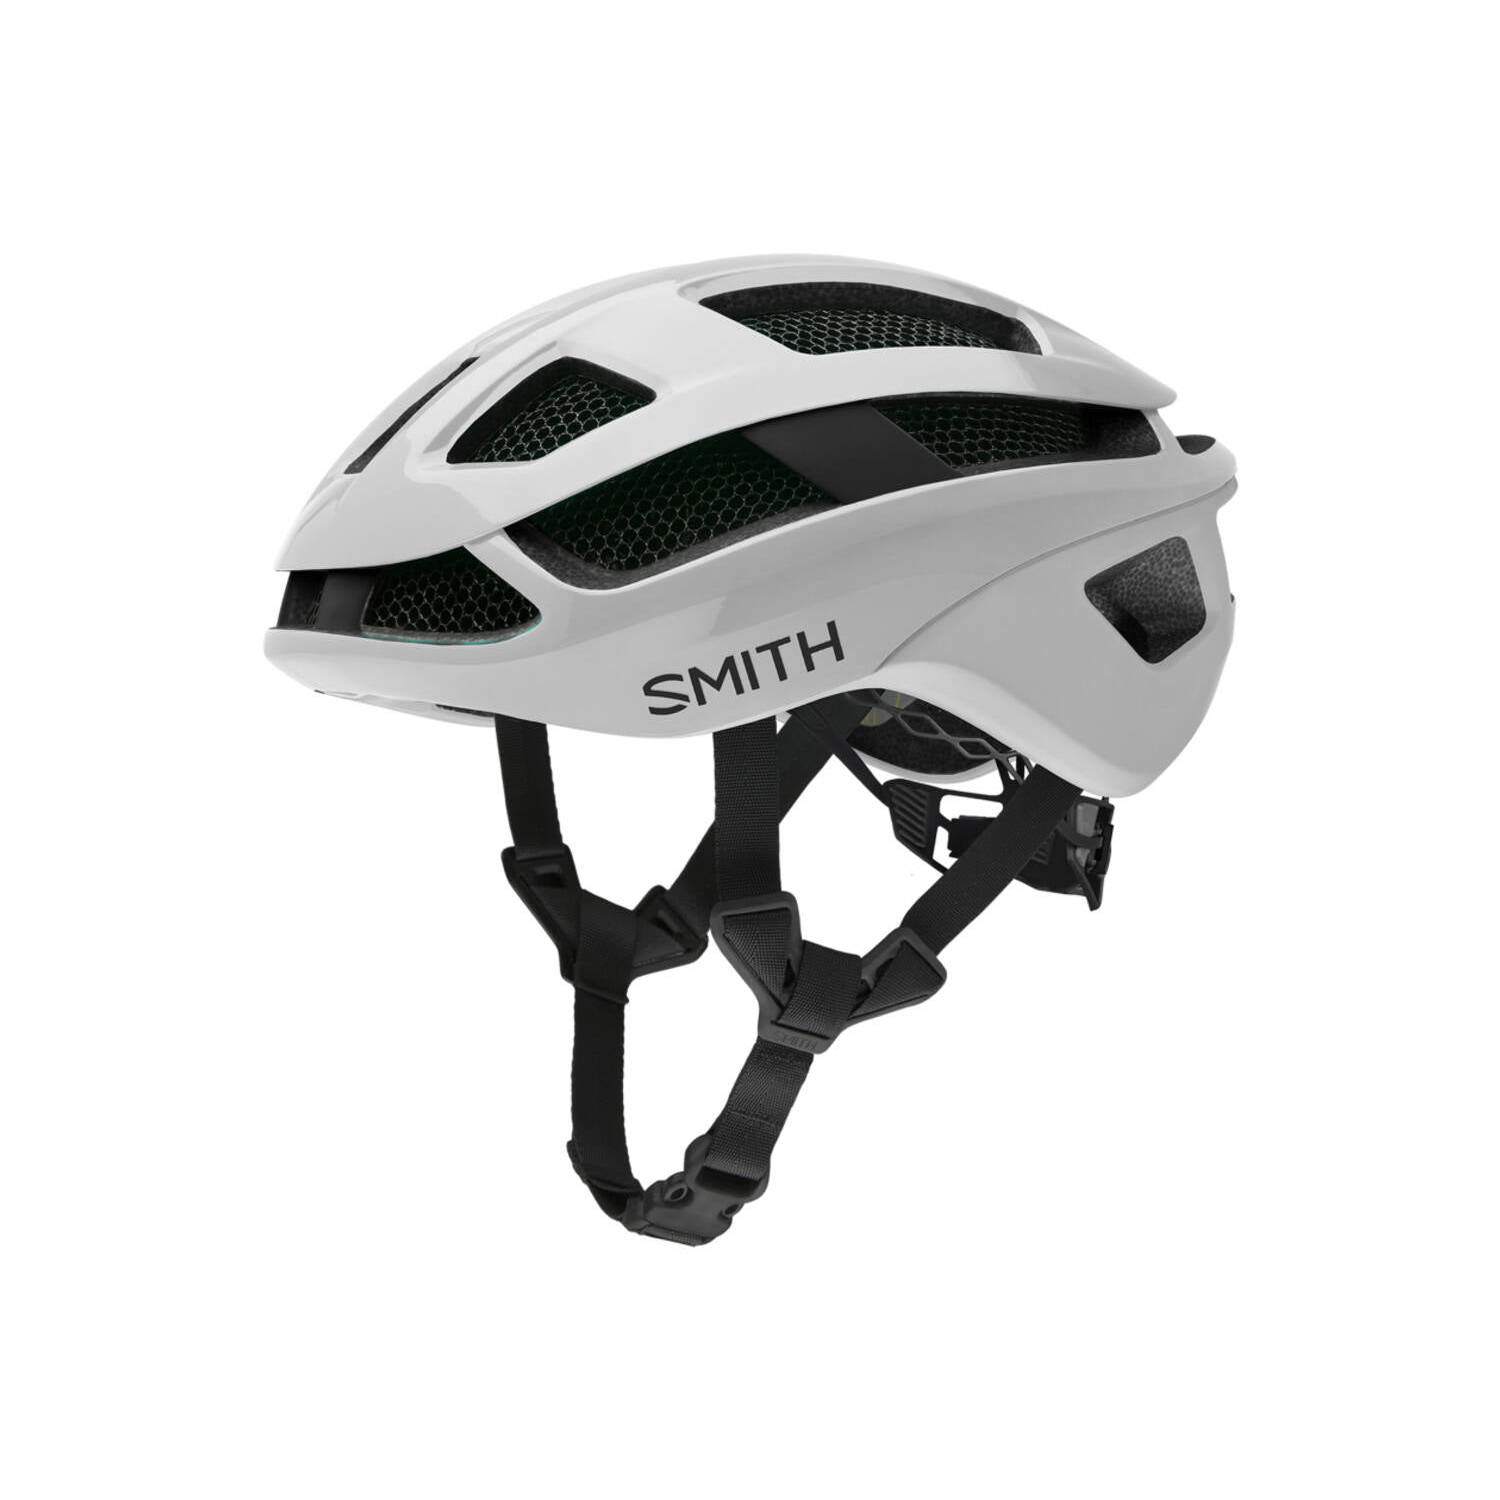 Smith Trace helm mips matte white